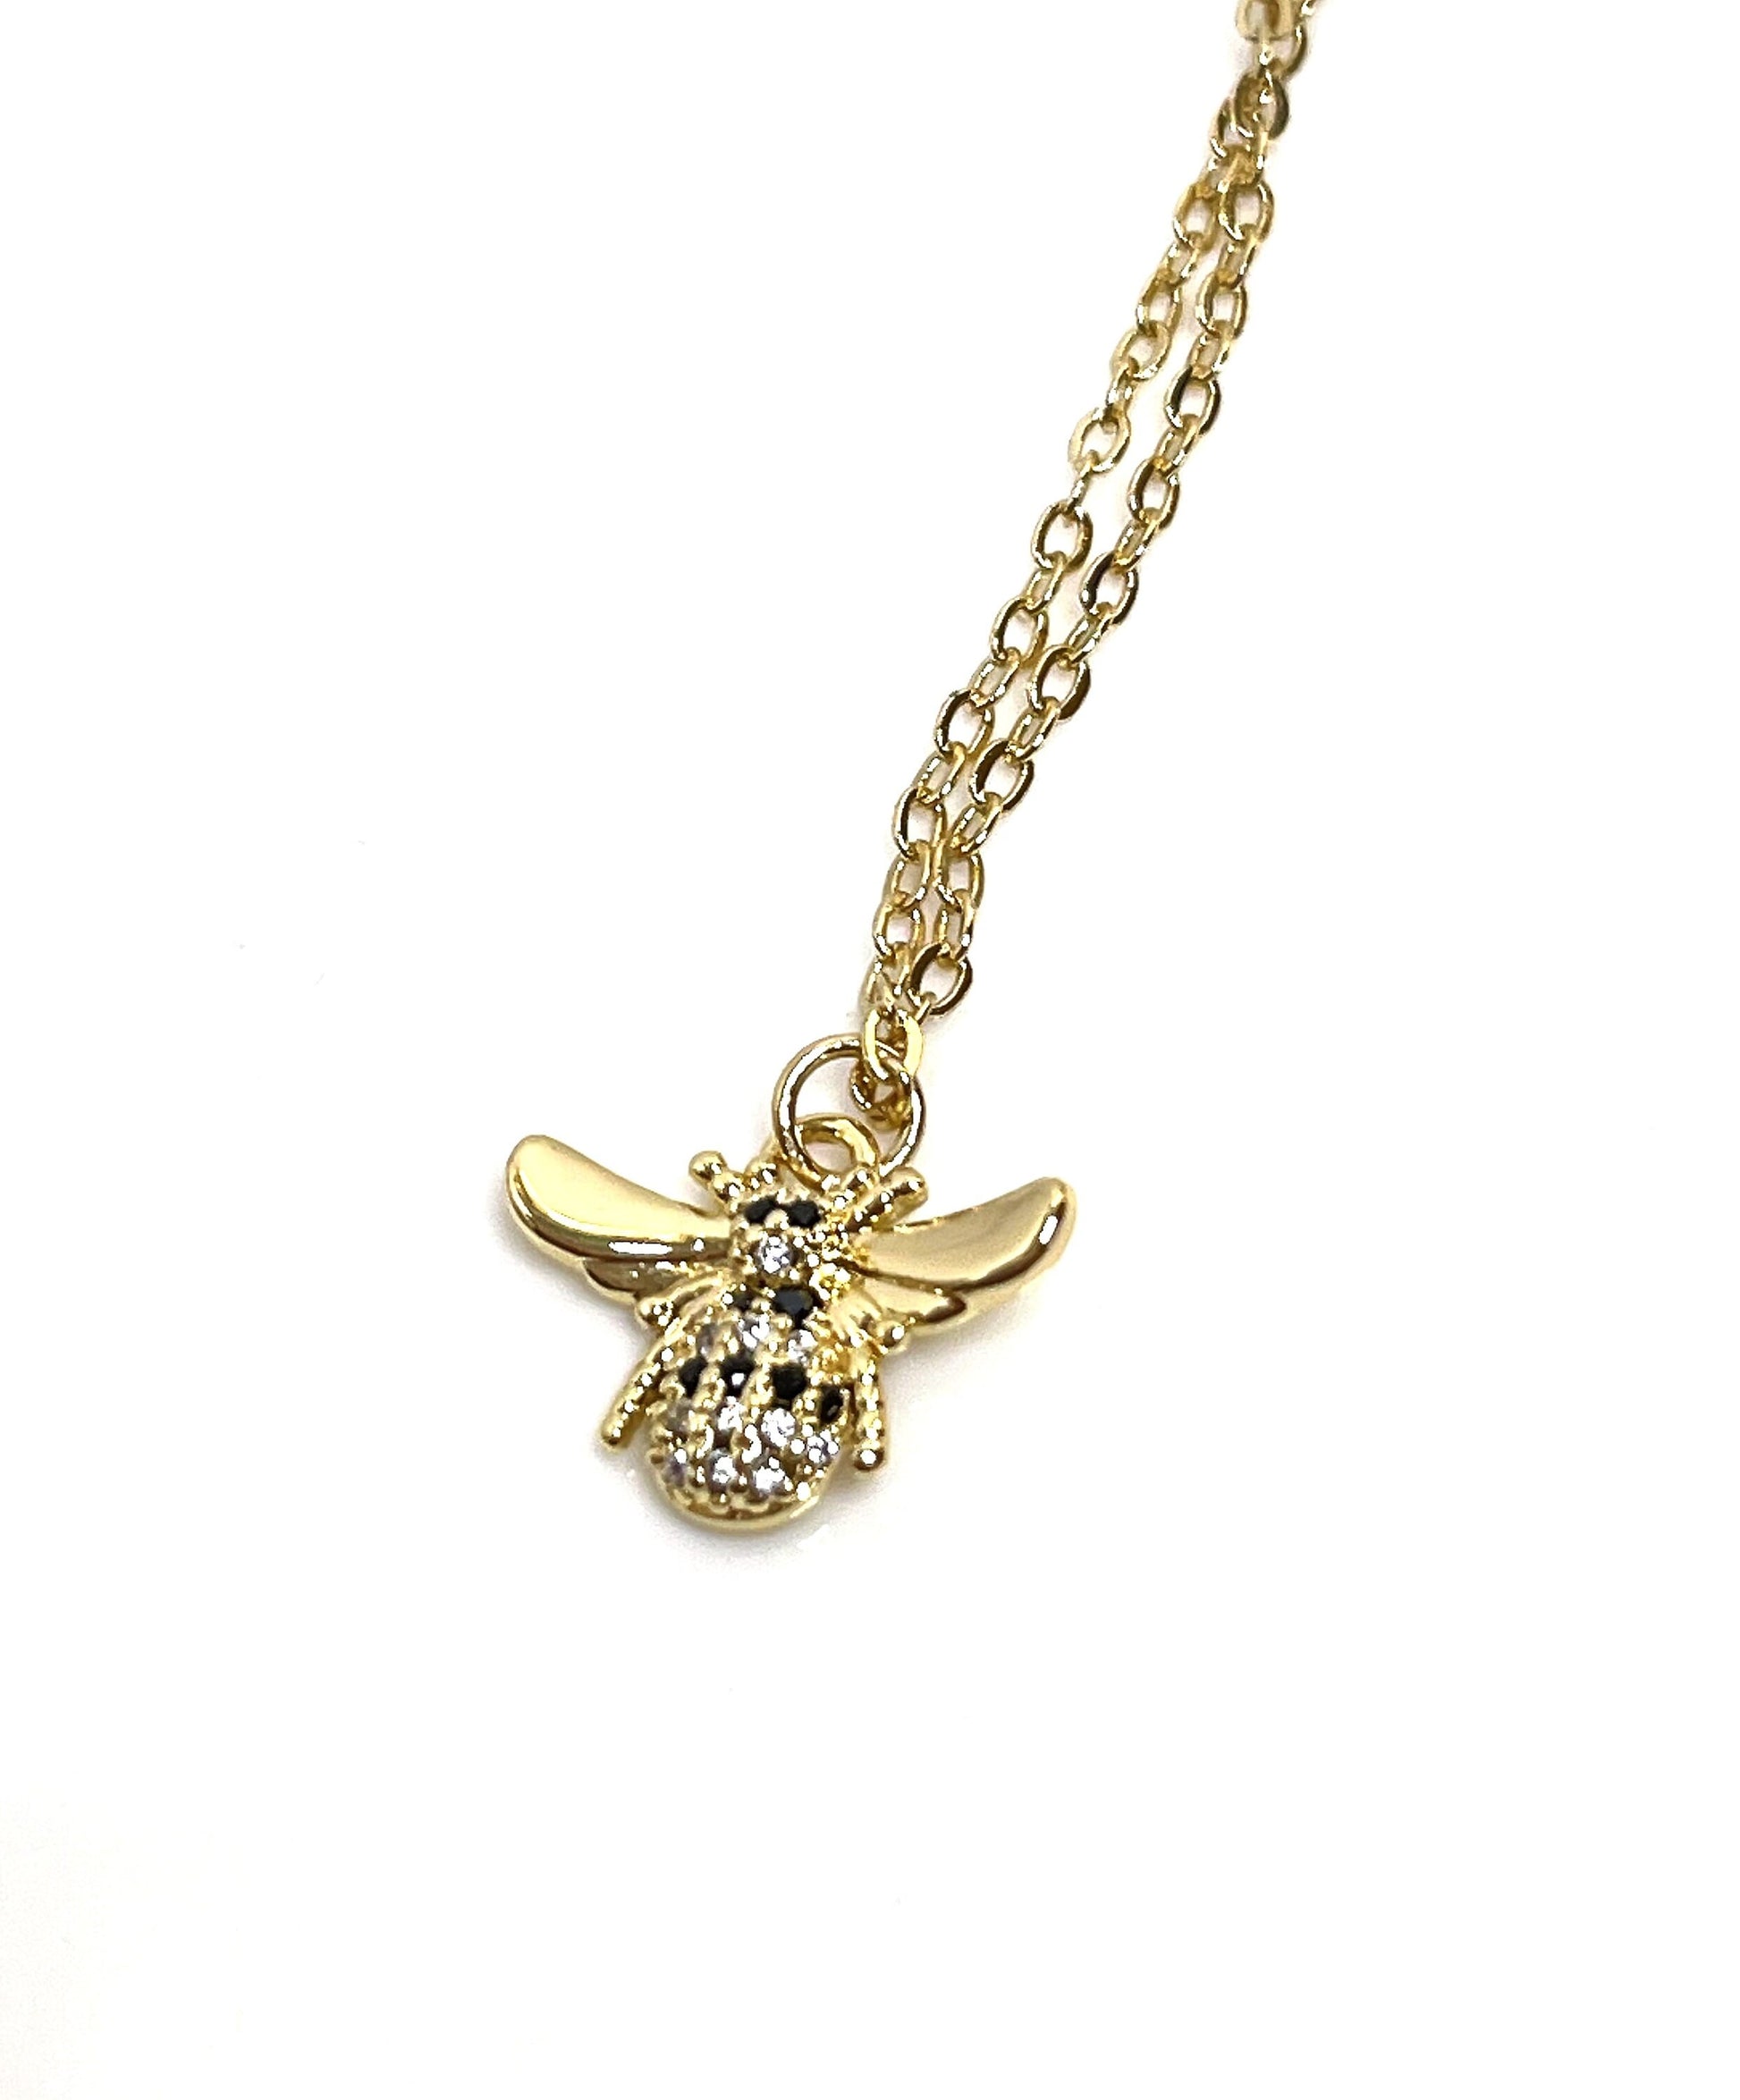 Bumble Bee Crystal Gold Necklace | Delicate Bee Jewelry | Gold Filled | Minimalist Pendant